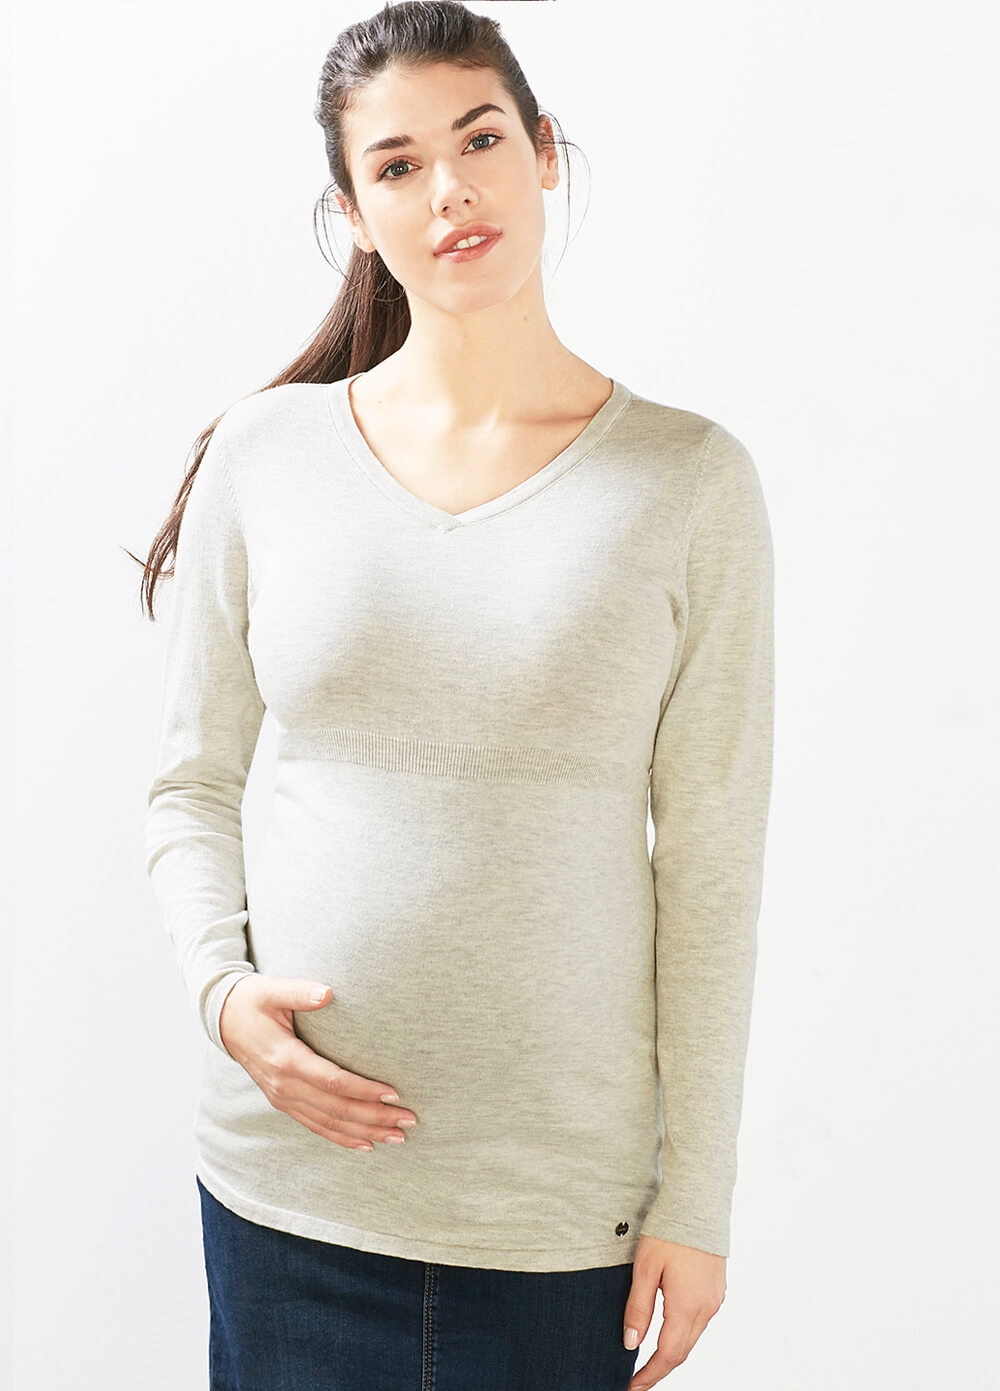 Esprit - Fitted Cotton Knit Jumper in Pale Grey - ON SALE